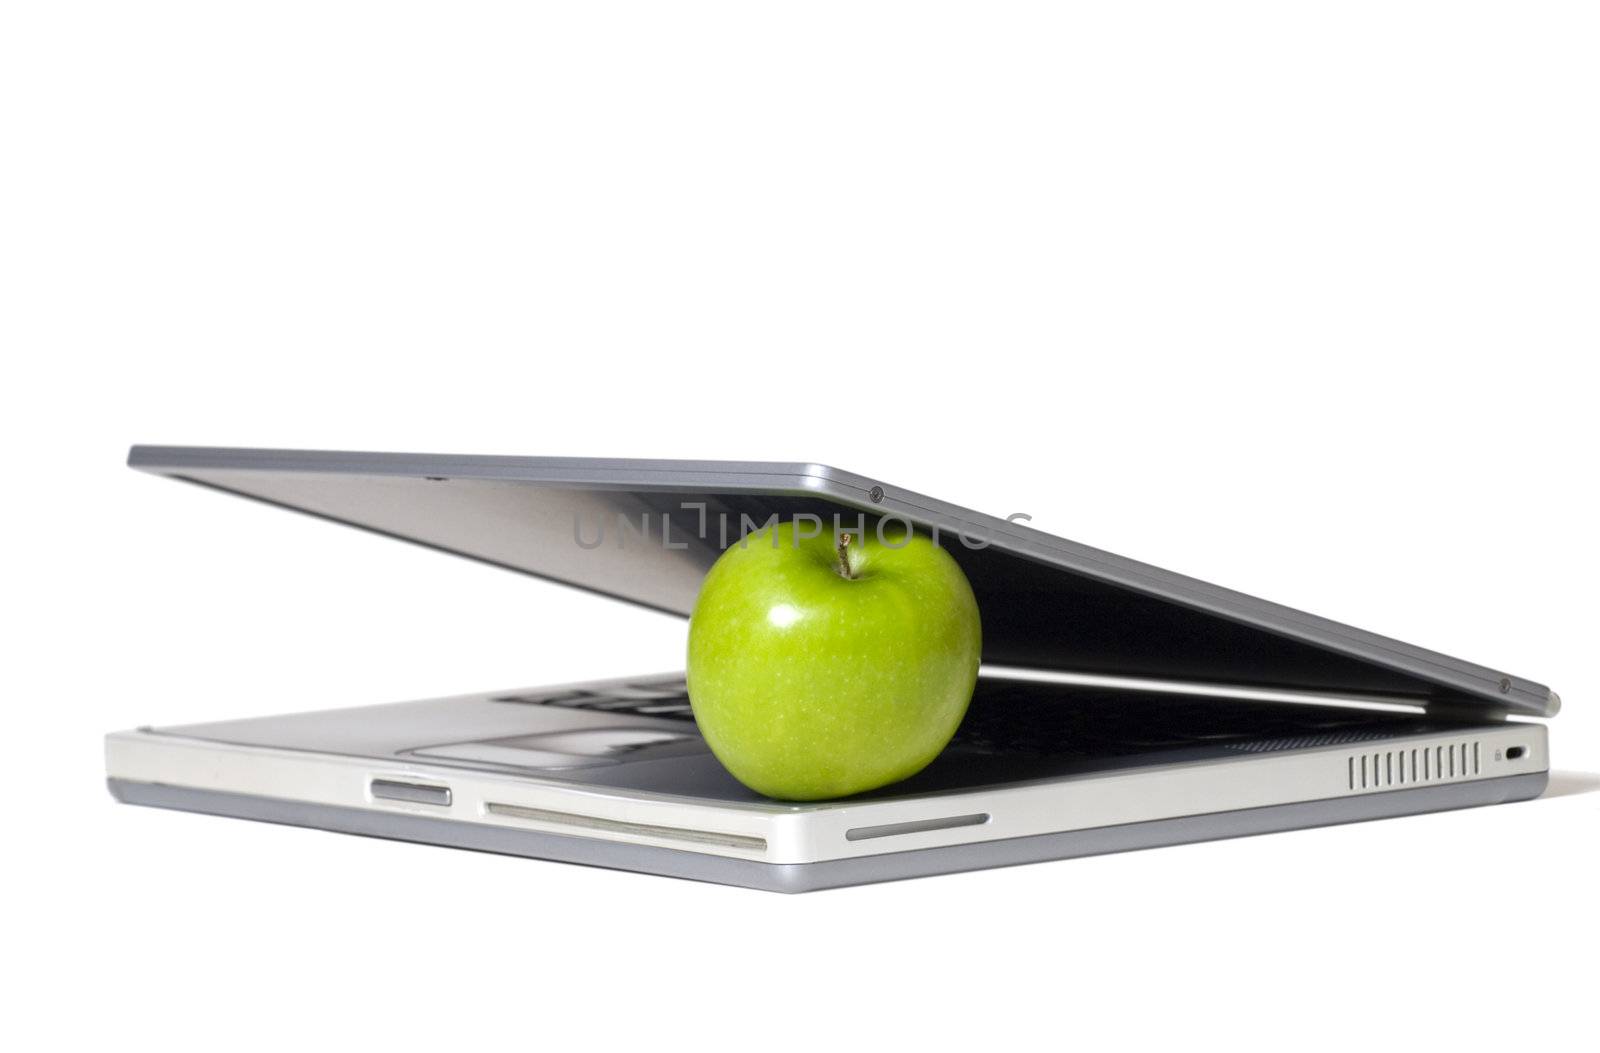 Laptop closing on a green apple - selective focus on the apple.